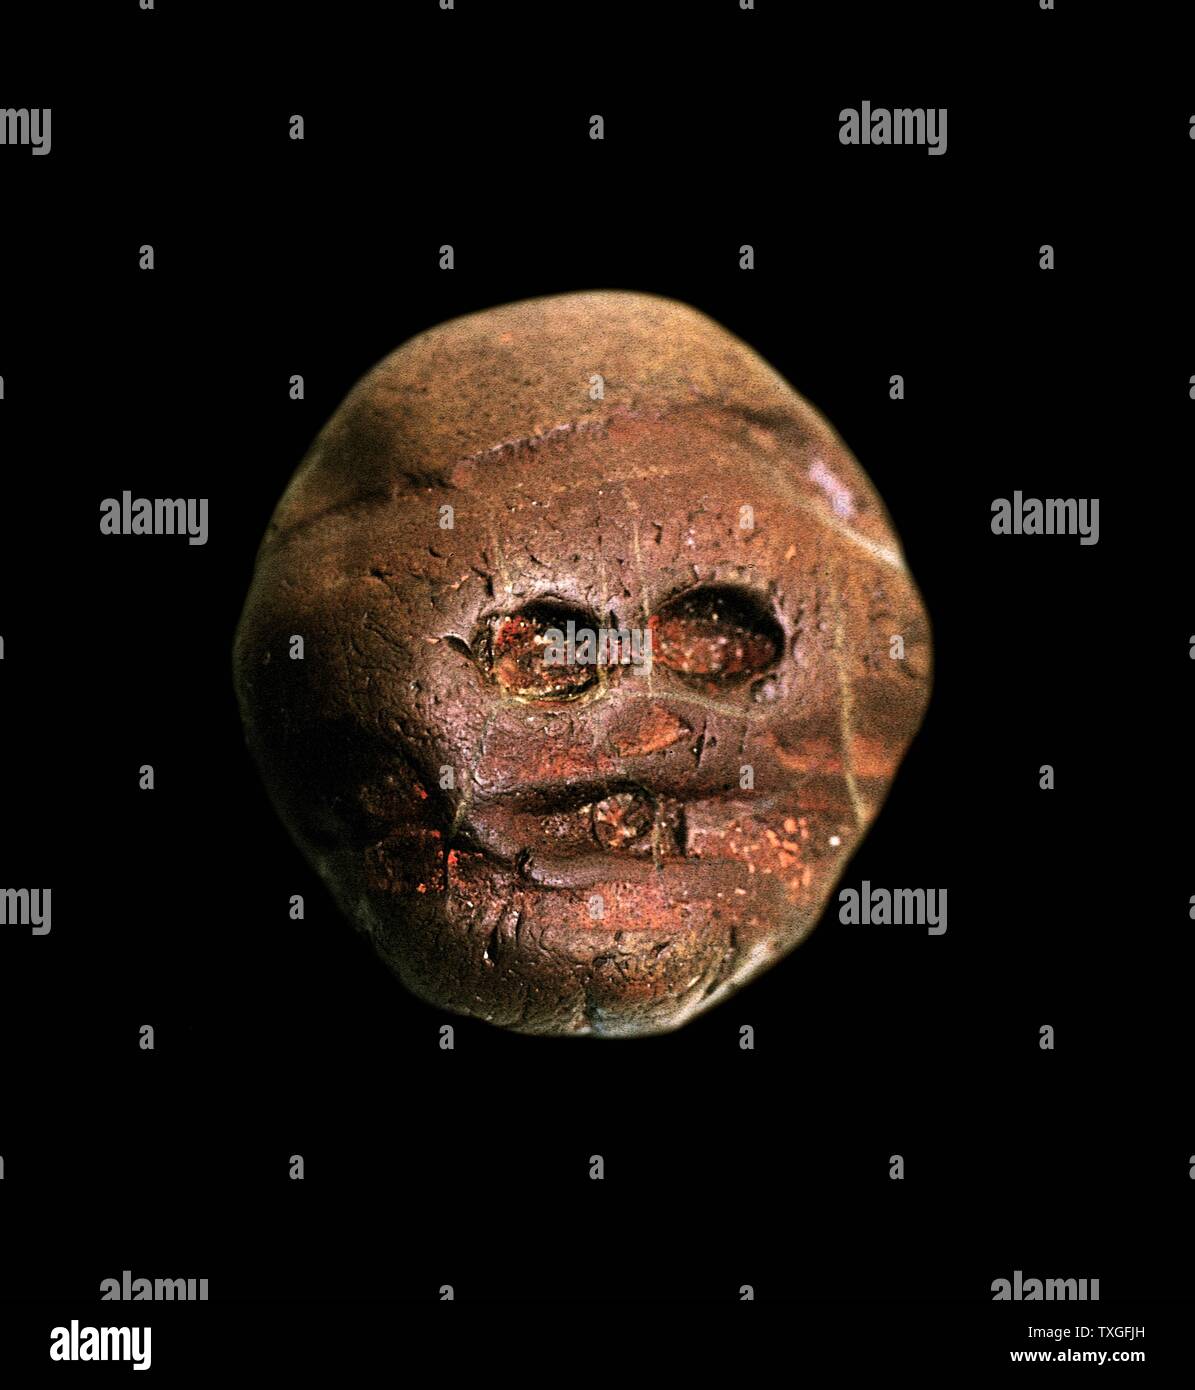 earliest recorded human made, artistic object. A pebble resembling a human face, from Makapansgat, South Africa, ca. 3,000,000 BCE Discovered in 1925 Stock Photo